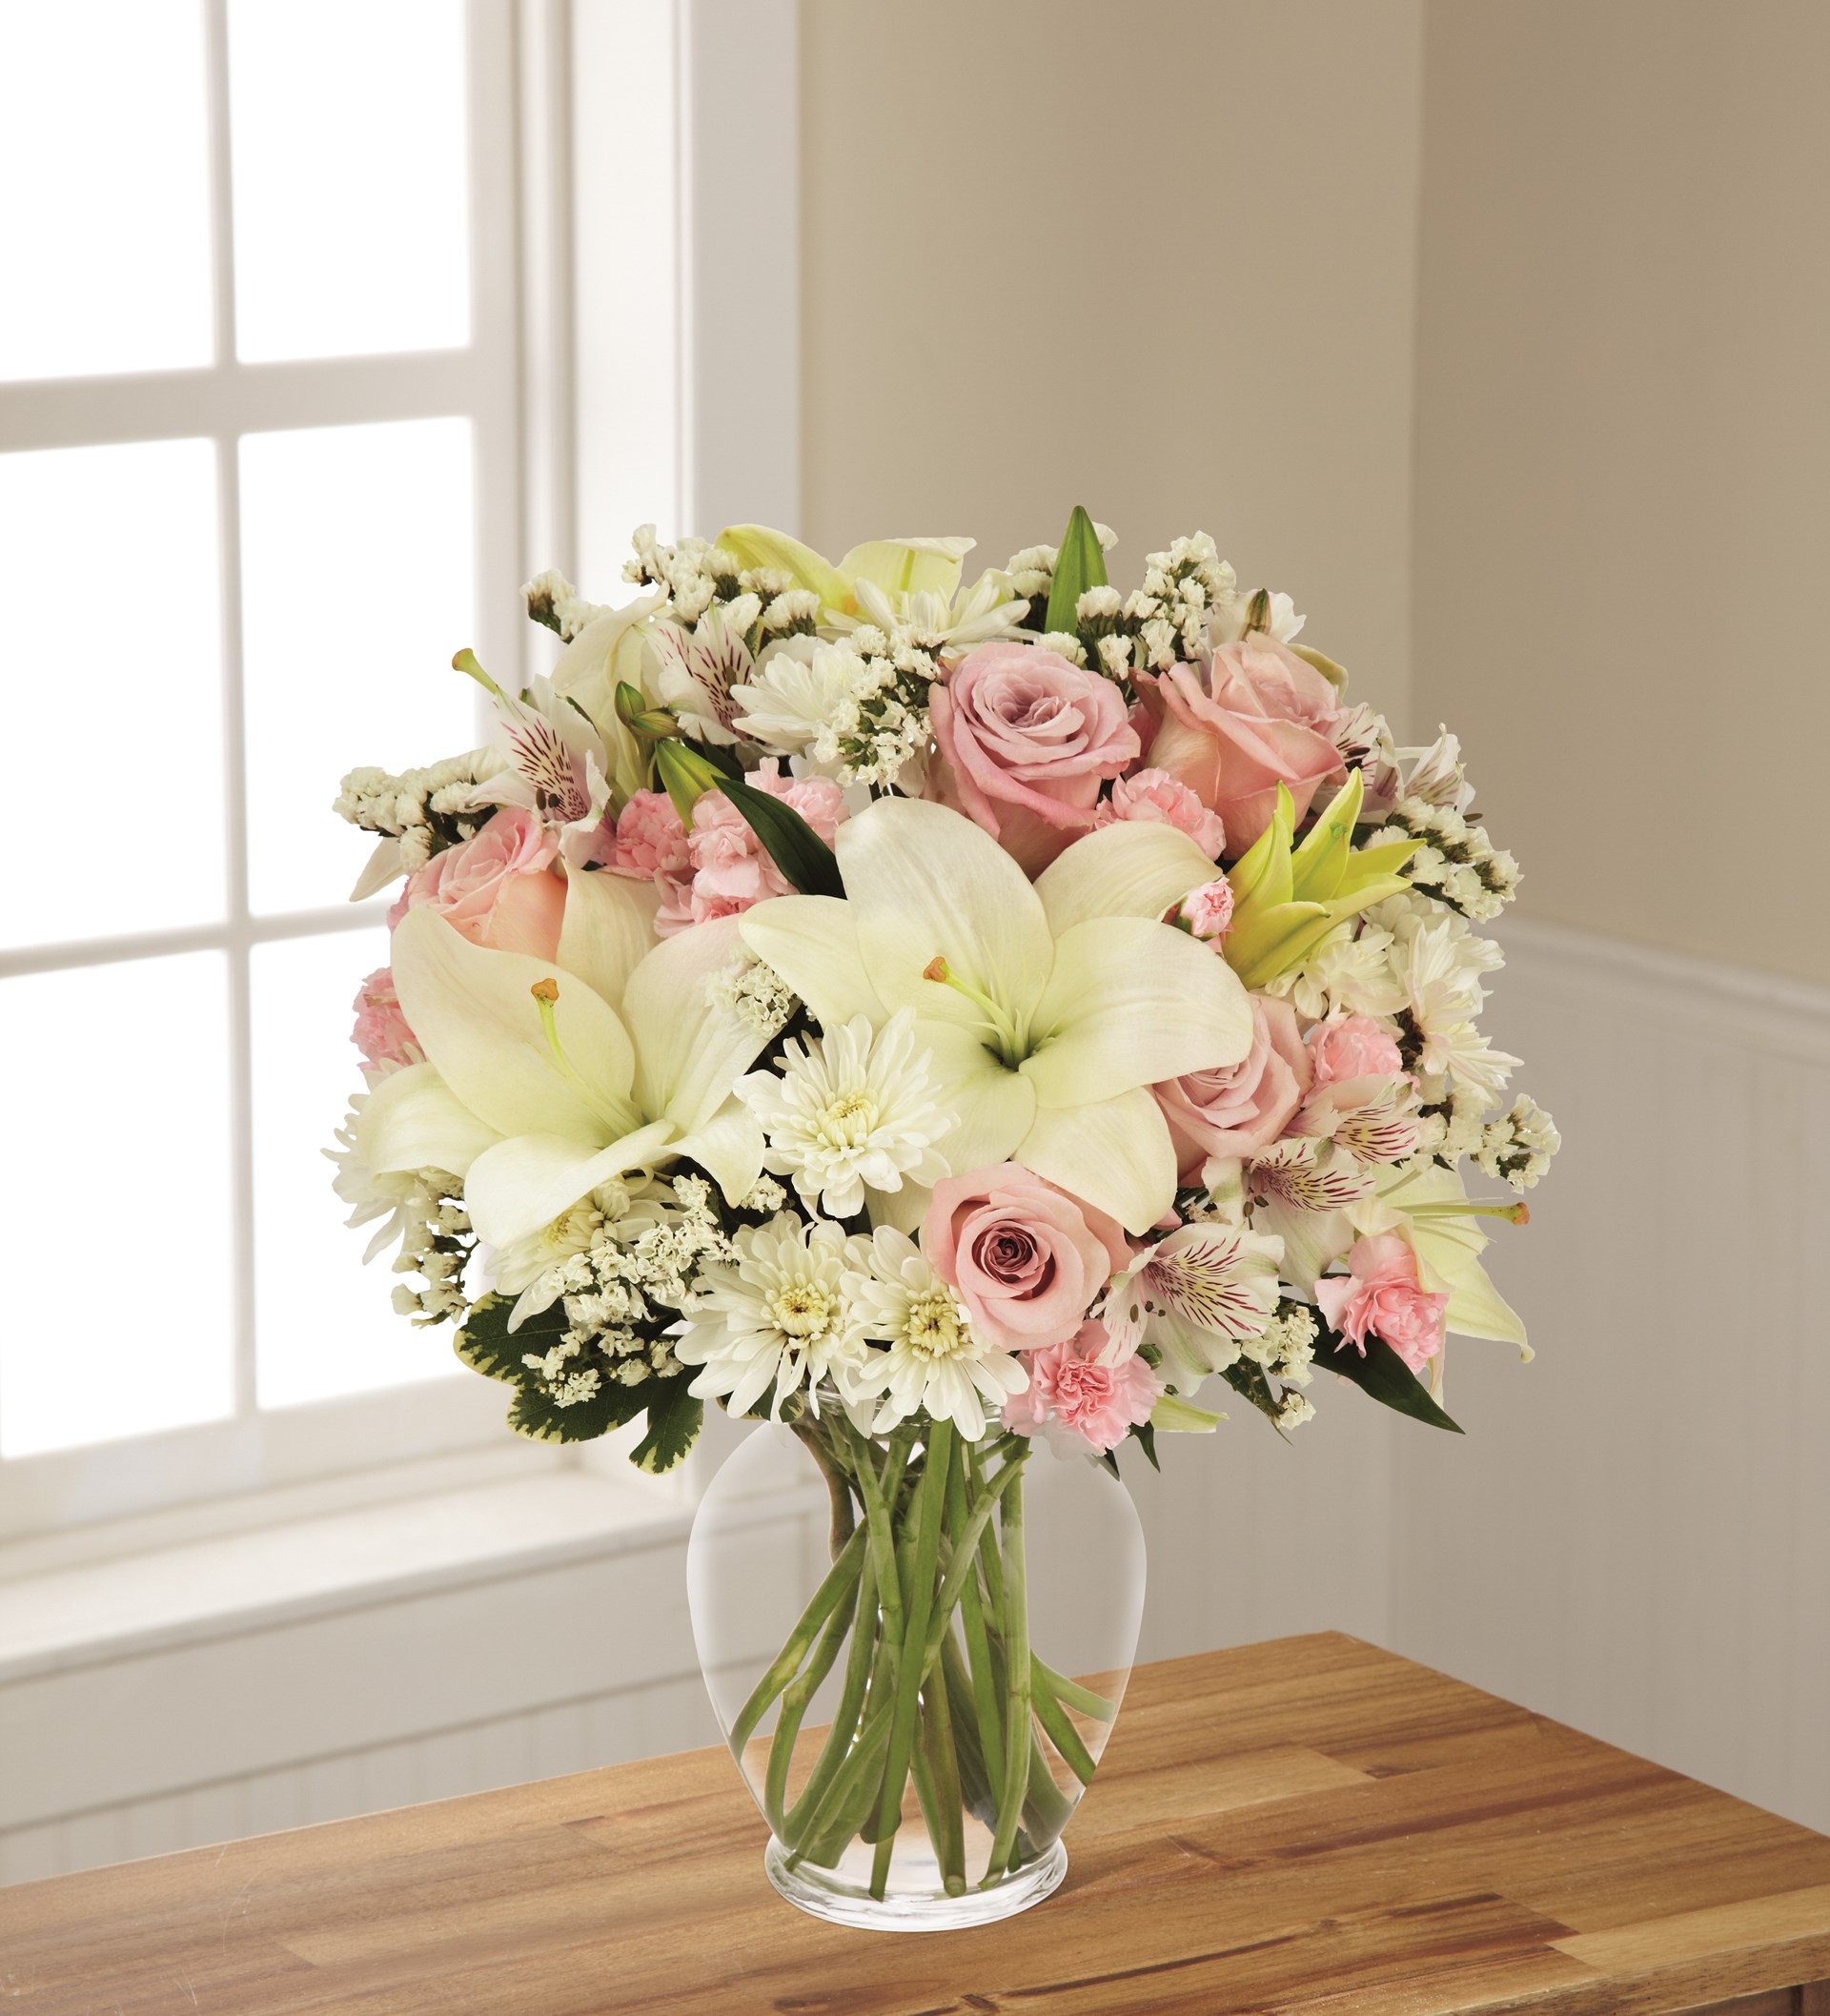 product image for The FTD Pink Dream Bouquet